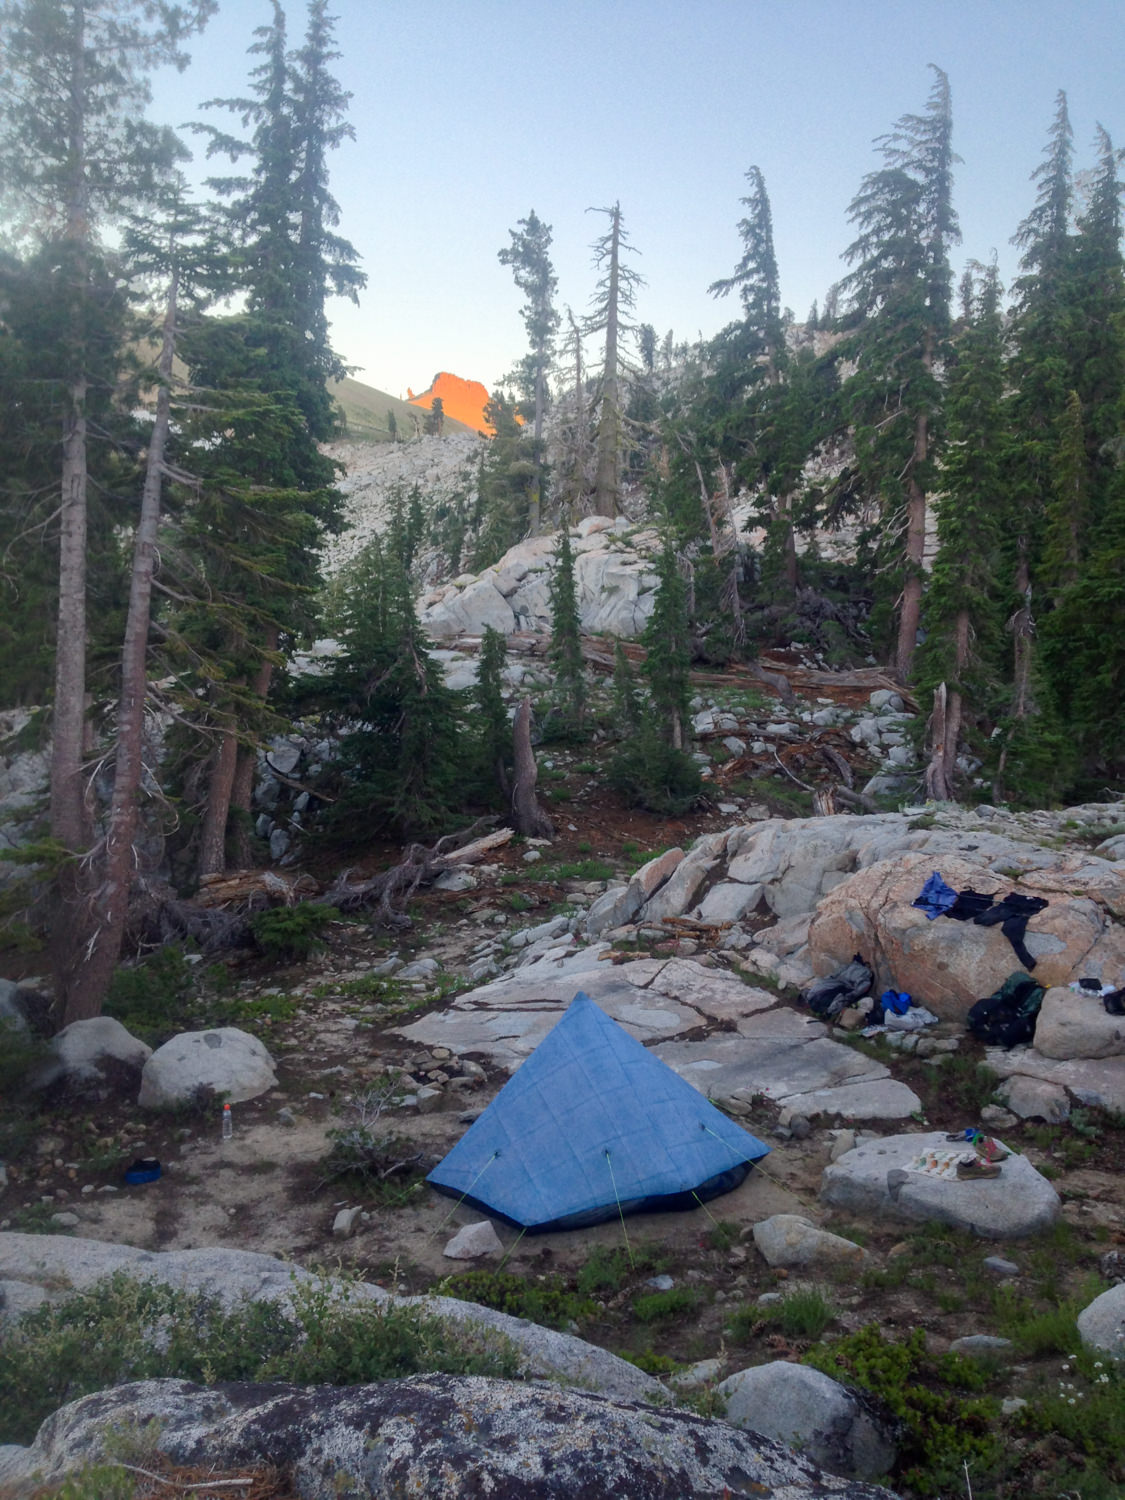 The Zpacks Plex Solo pitched among granite boulders along the Pacific Crest Trail